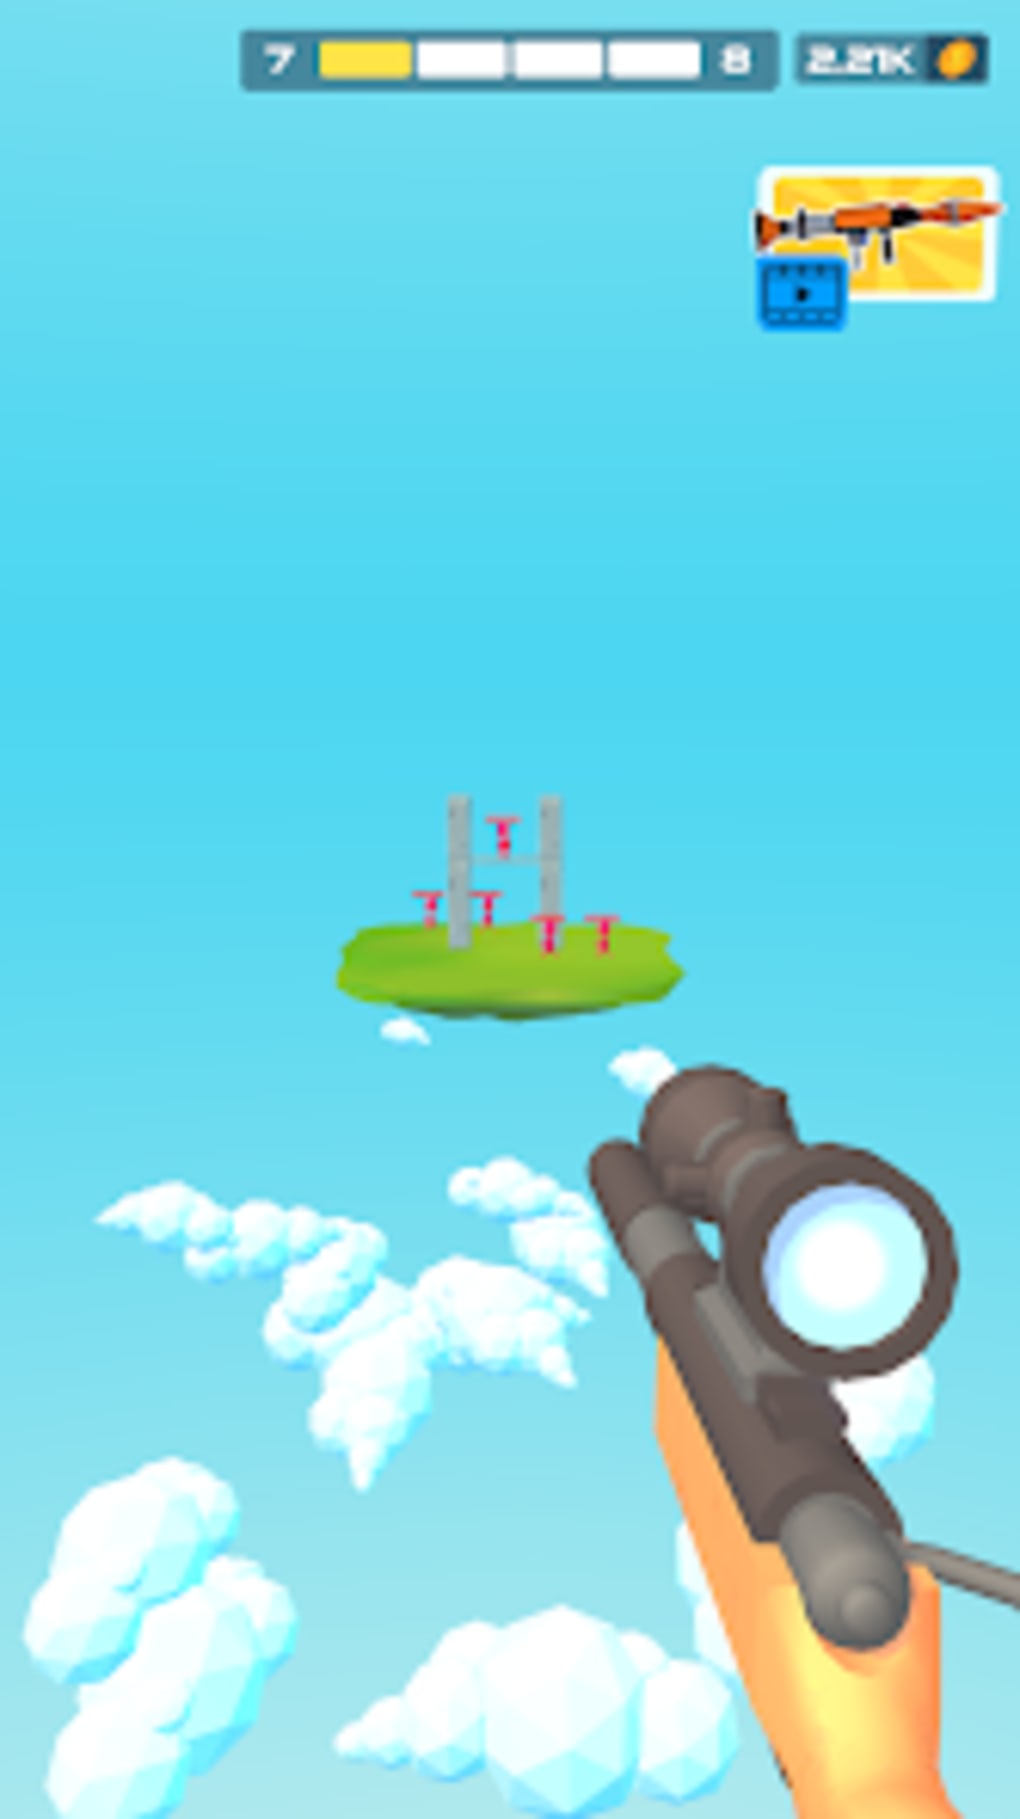 SHOOTZ - Play Online for Free!